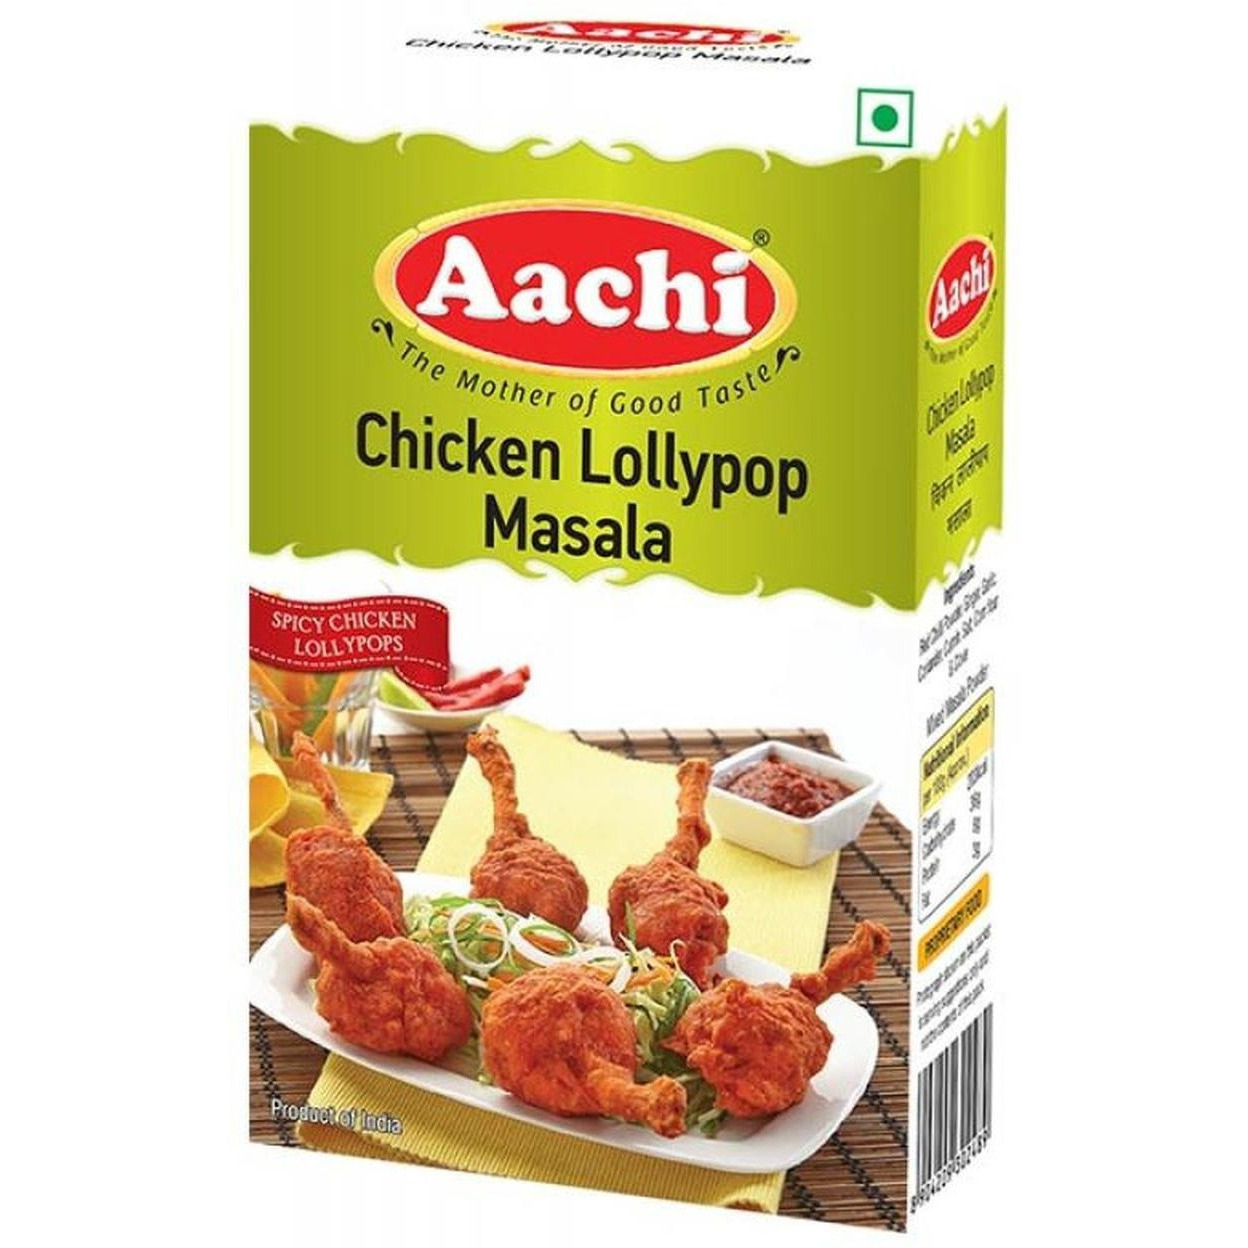 Pack of 3 - Aachi Chicken Lollypop Masala - 200 Gm (7 Oz)